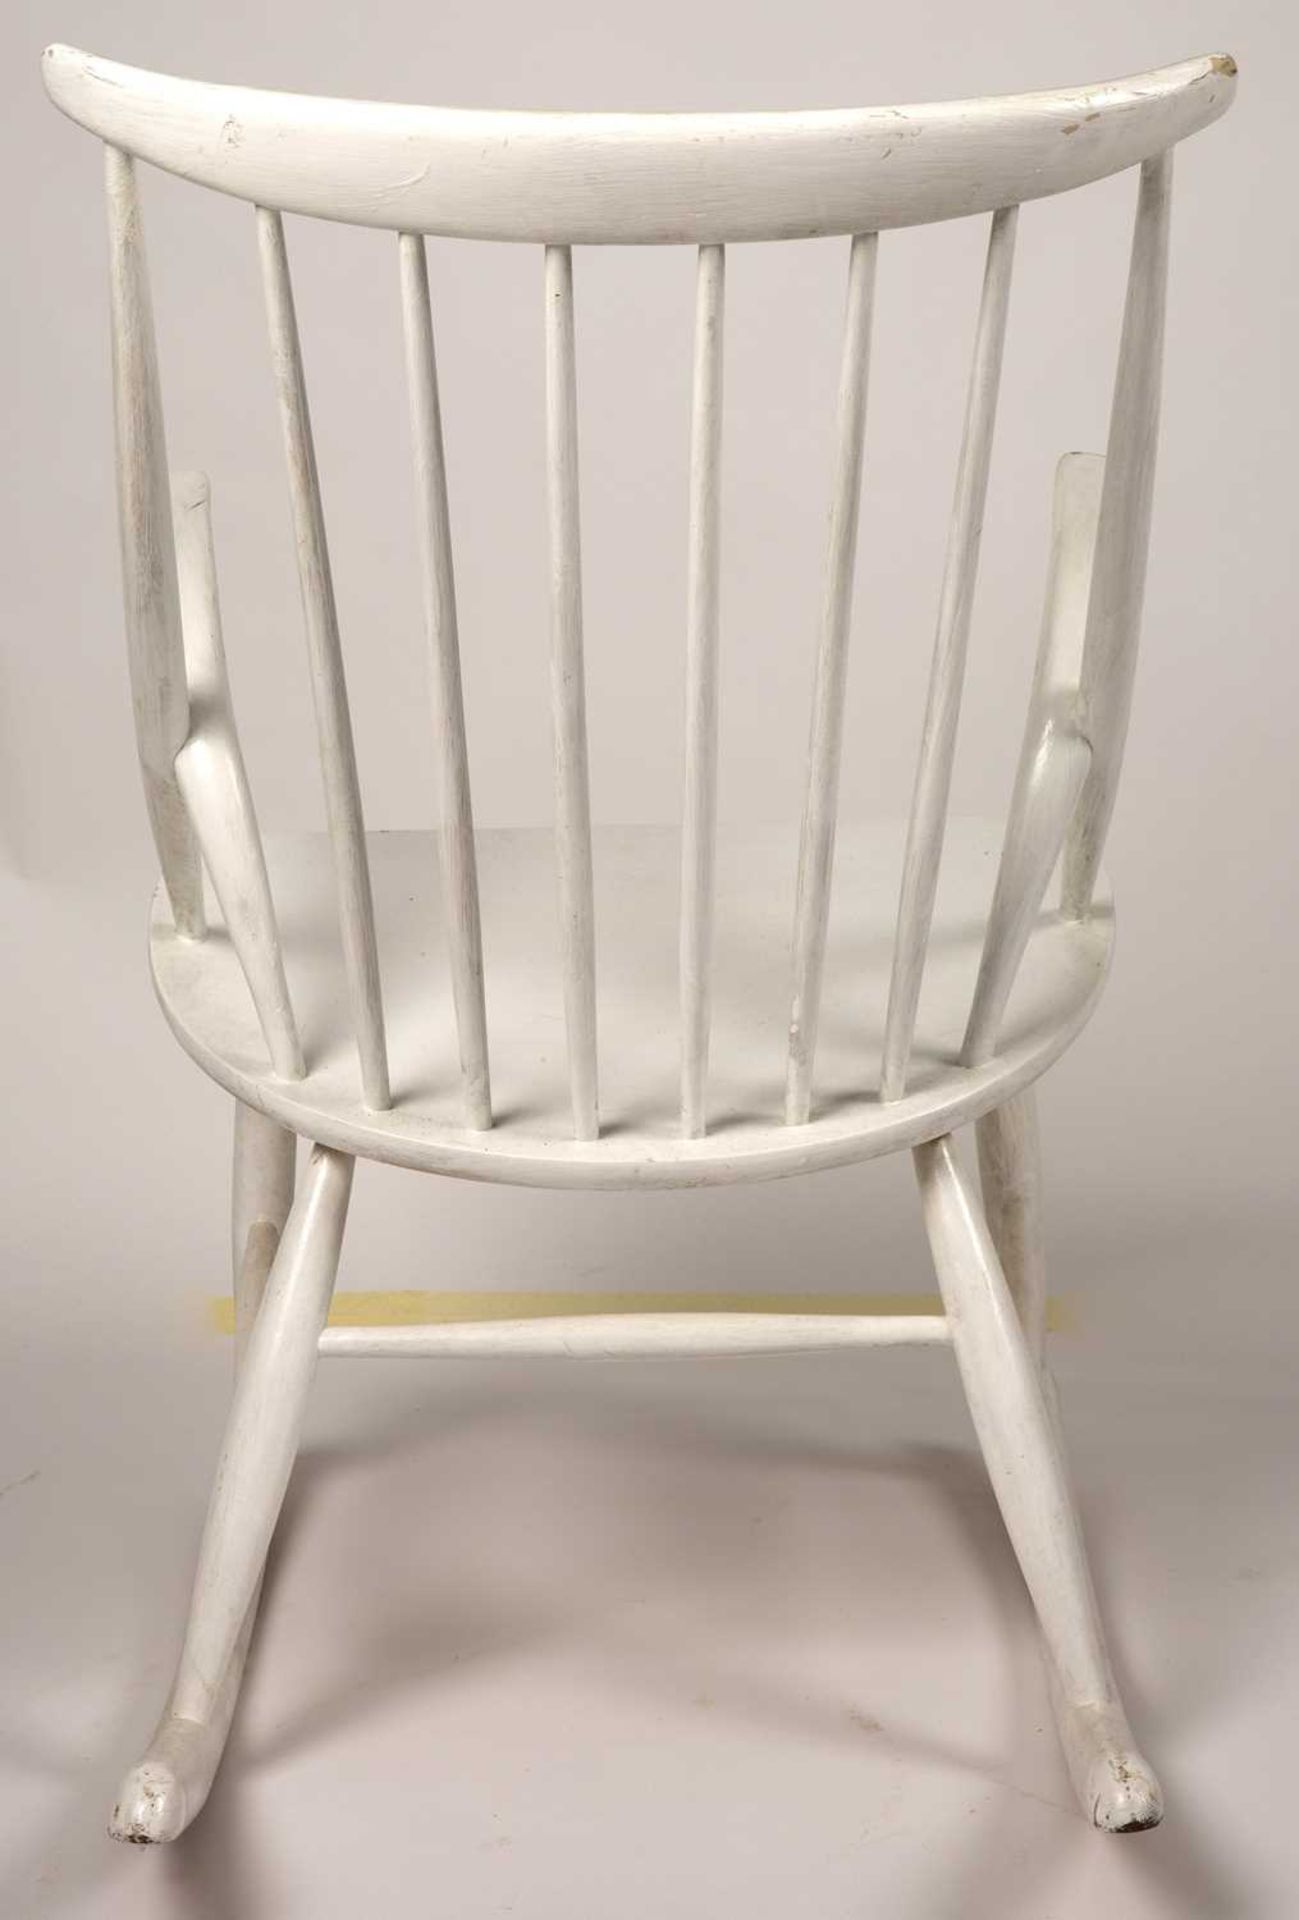 Illum Wikkelso for Neil Eilersen Rocking chair, designed in 1958 white painted wood 95cm high, 55cm - Image 3 of 4